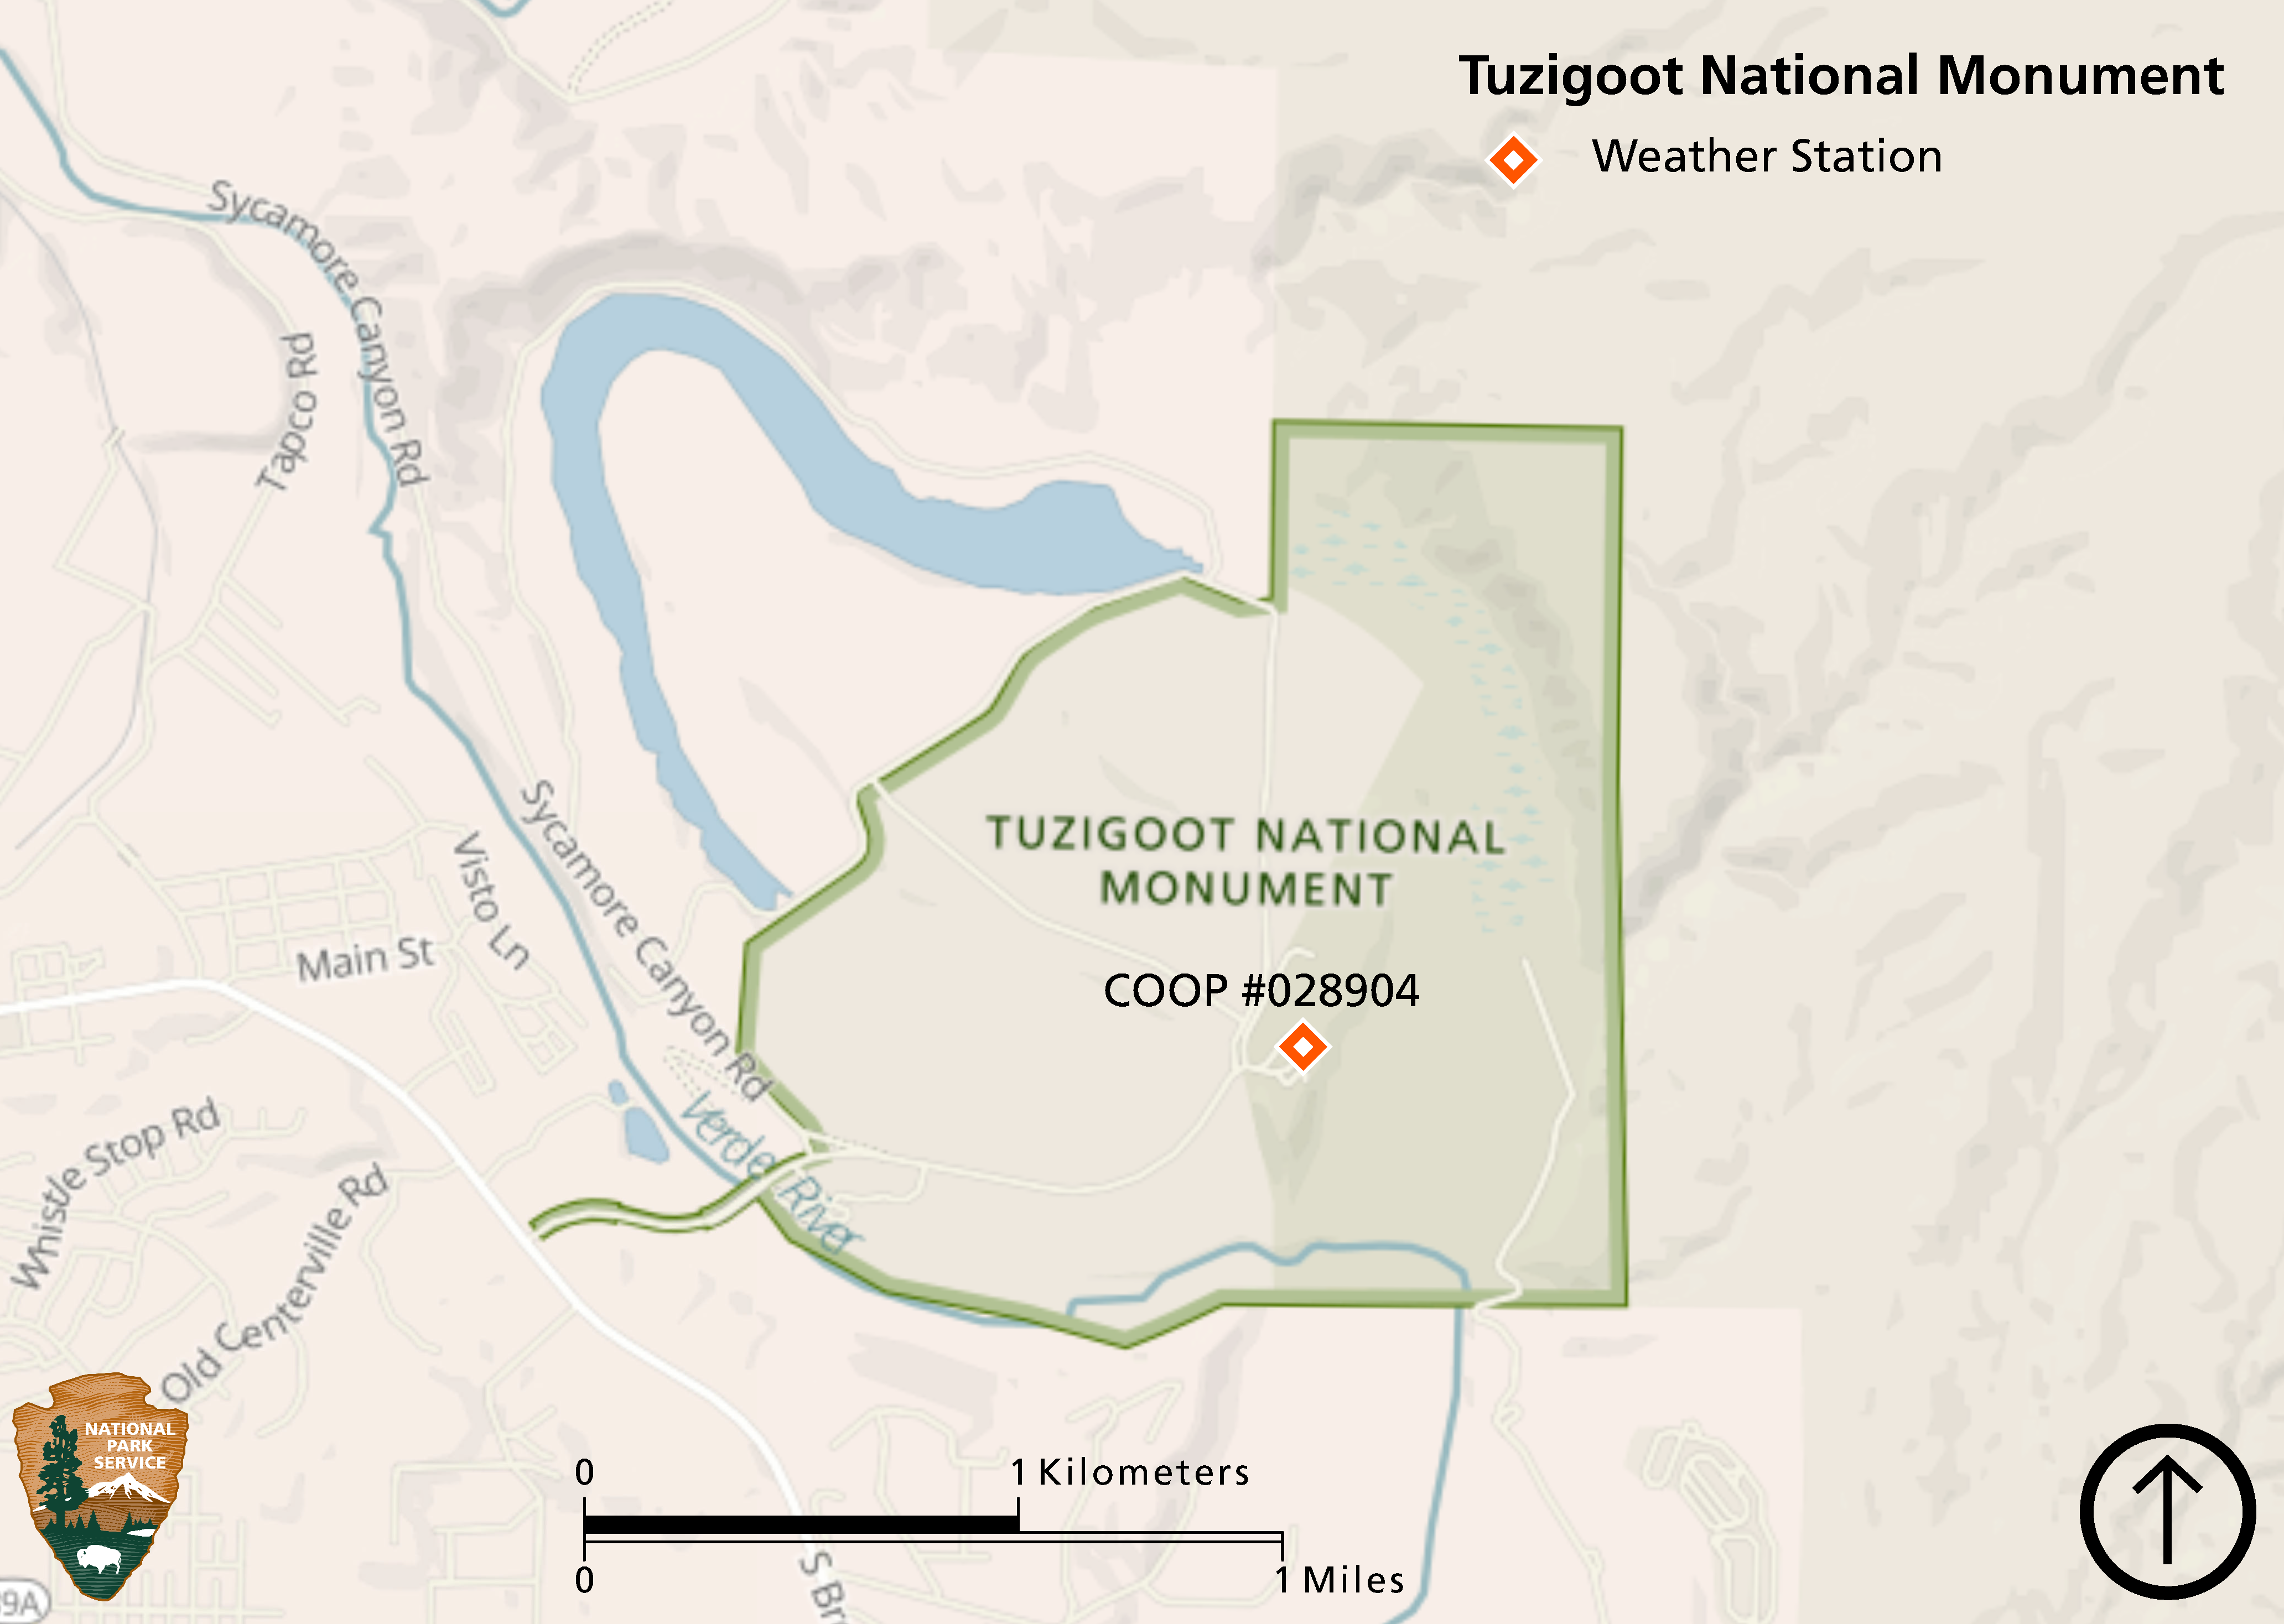 Map of Tuzigoot National Monument showing the weather station near the center of the park and the Verde River nearby the park.